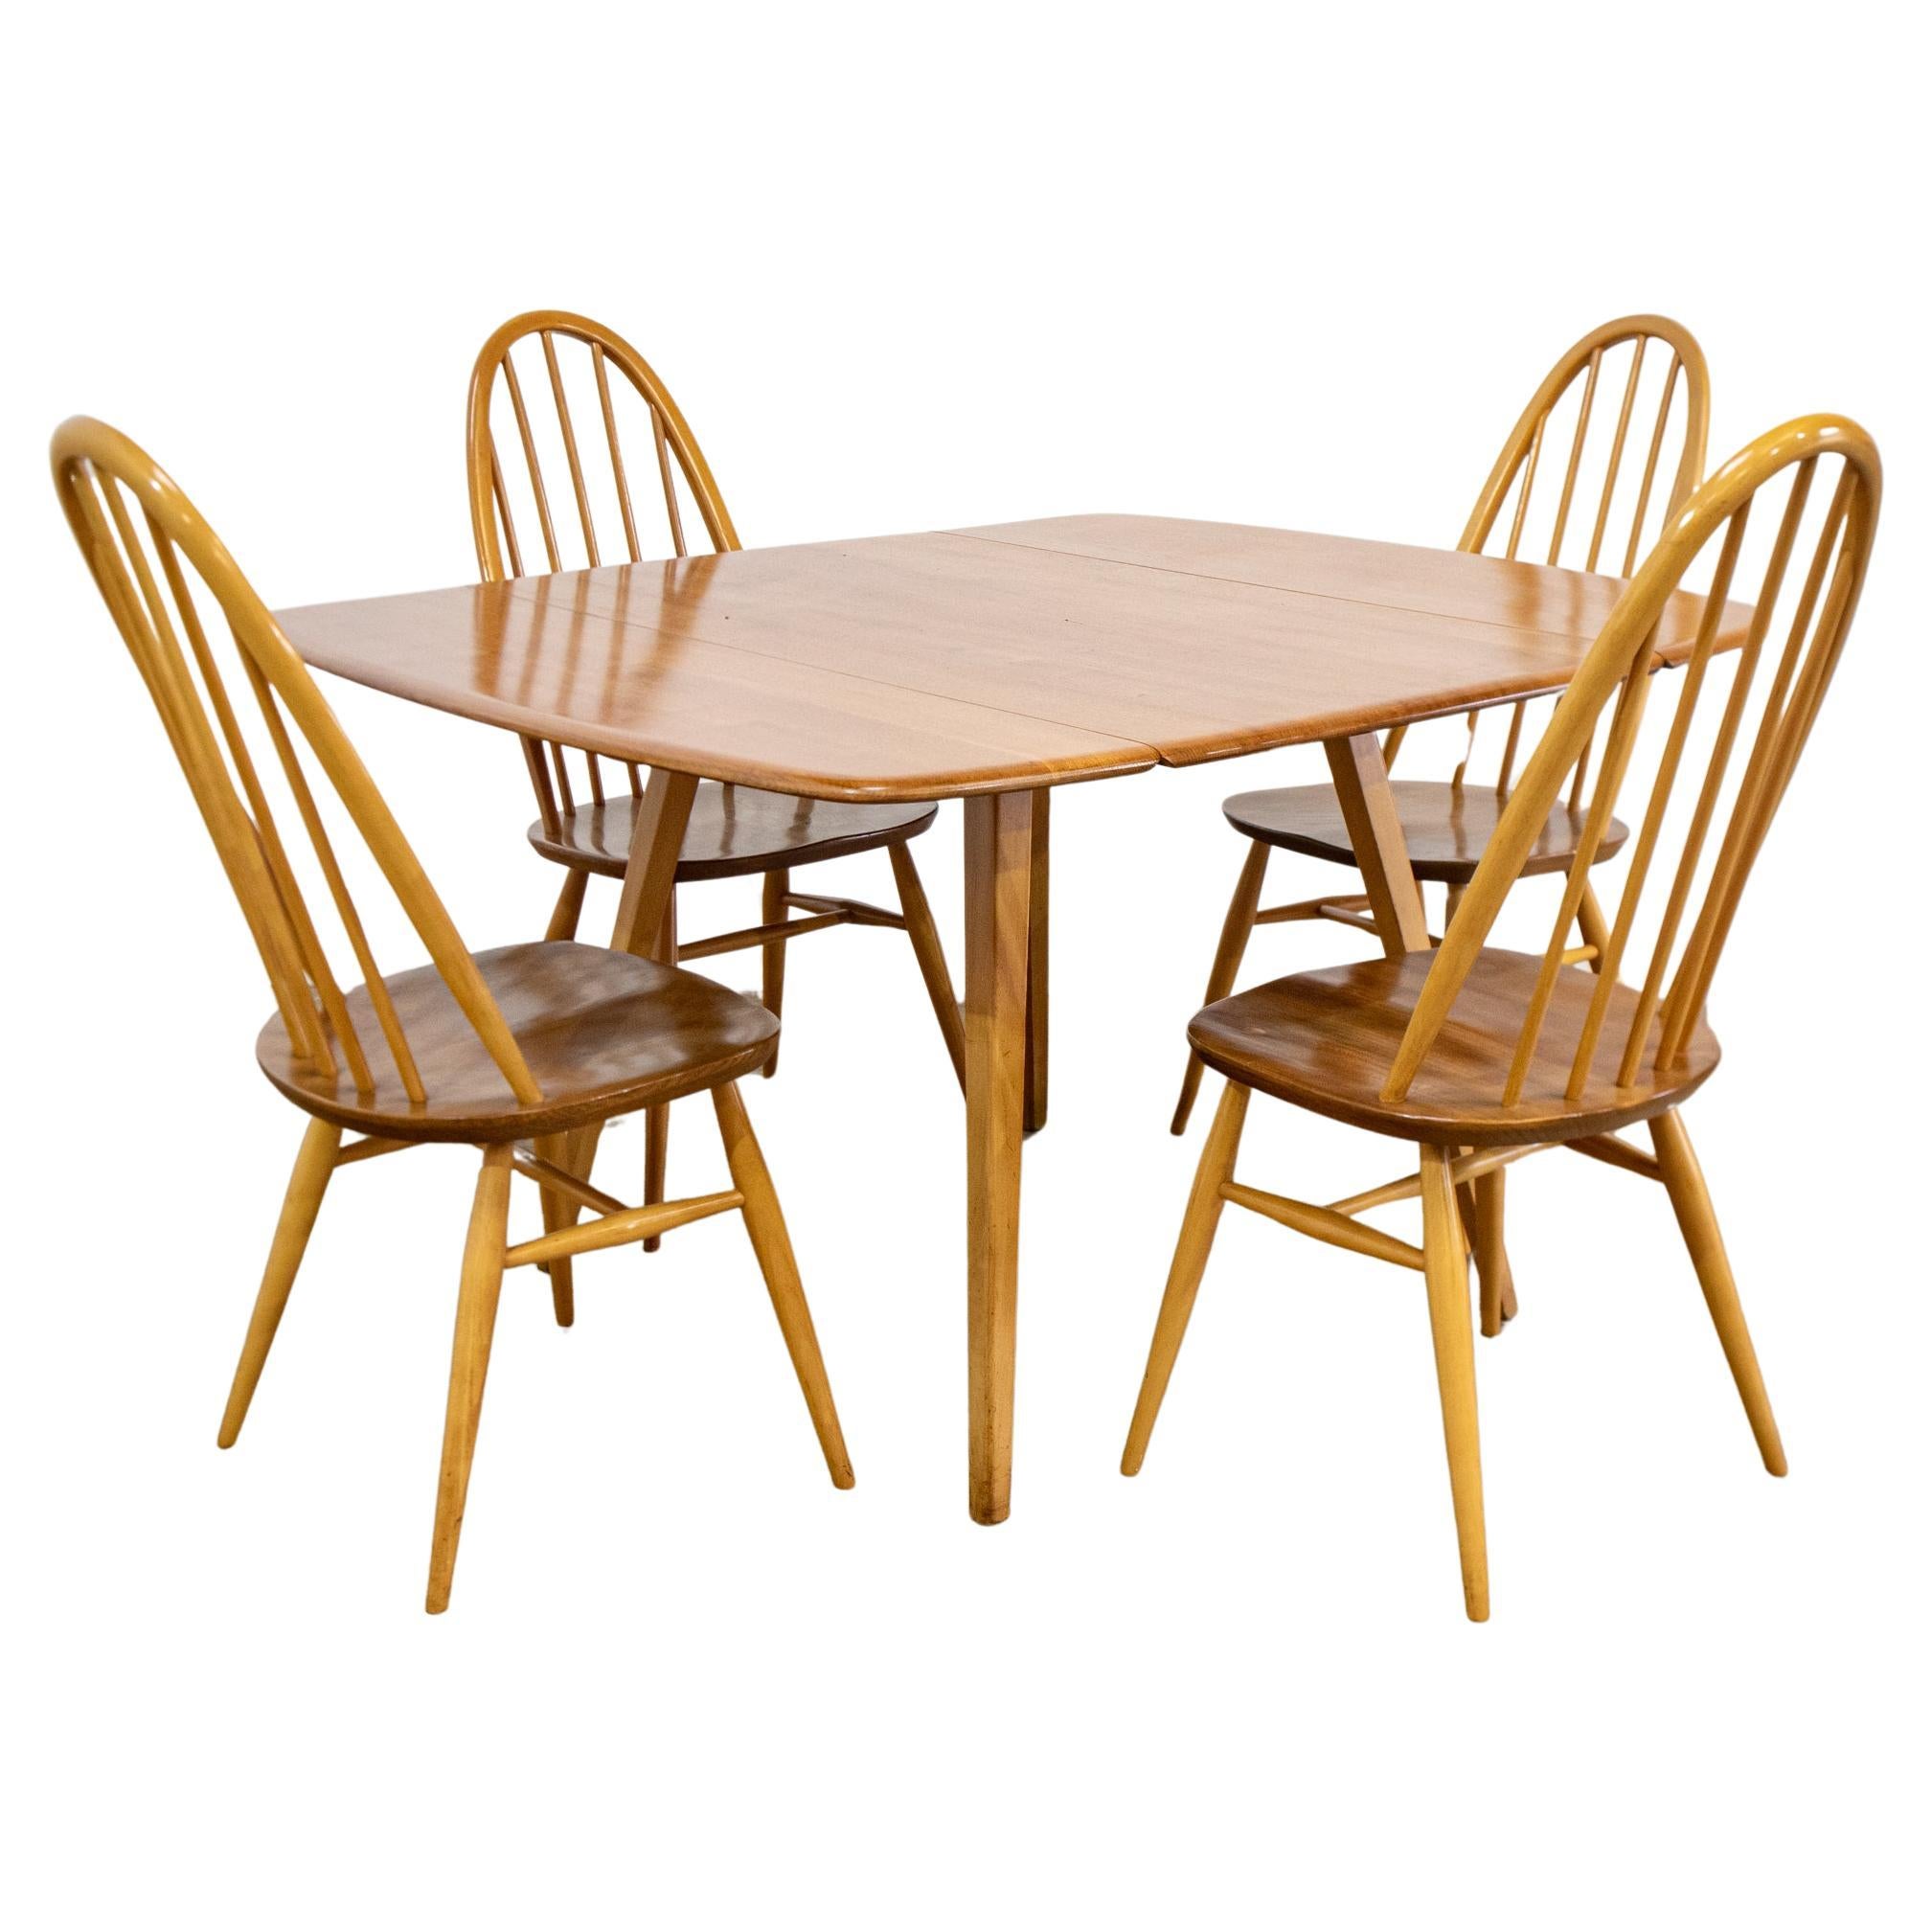 Ercol Drop Leaf Dining Table Model 492 & 4 Chairs For Sale